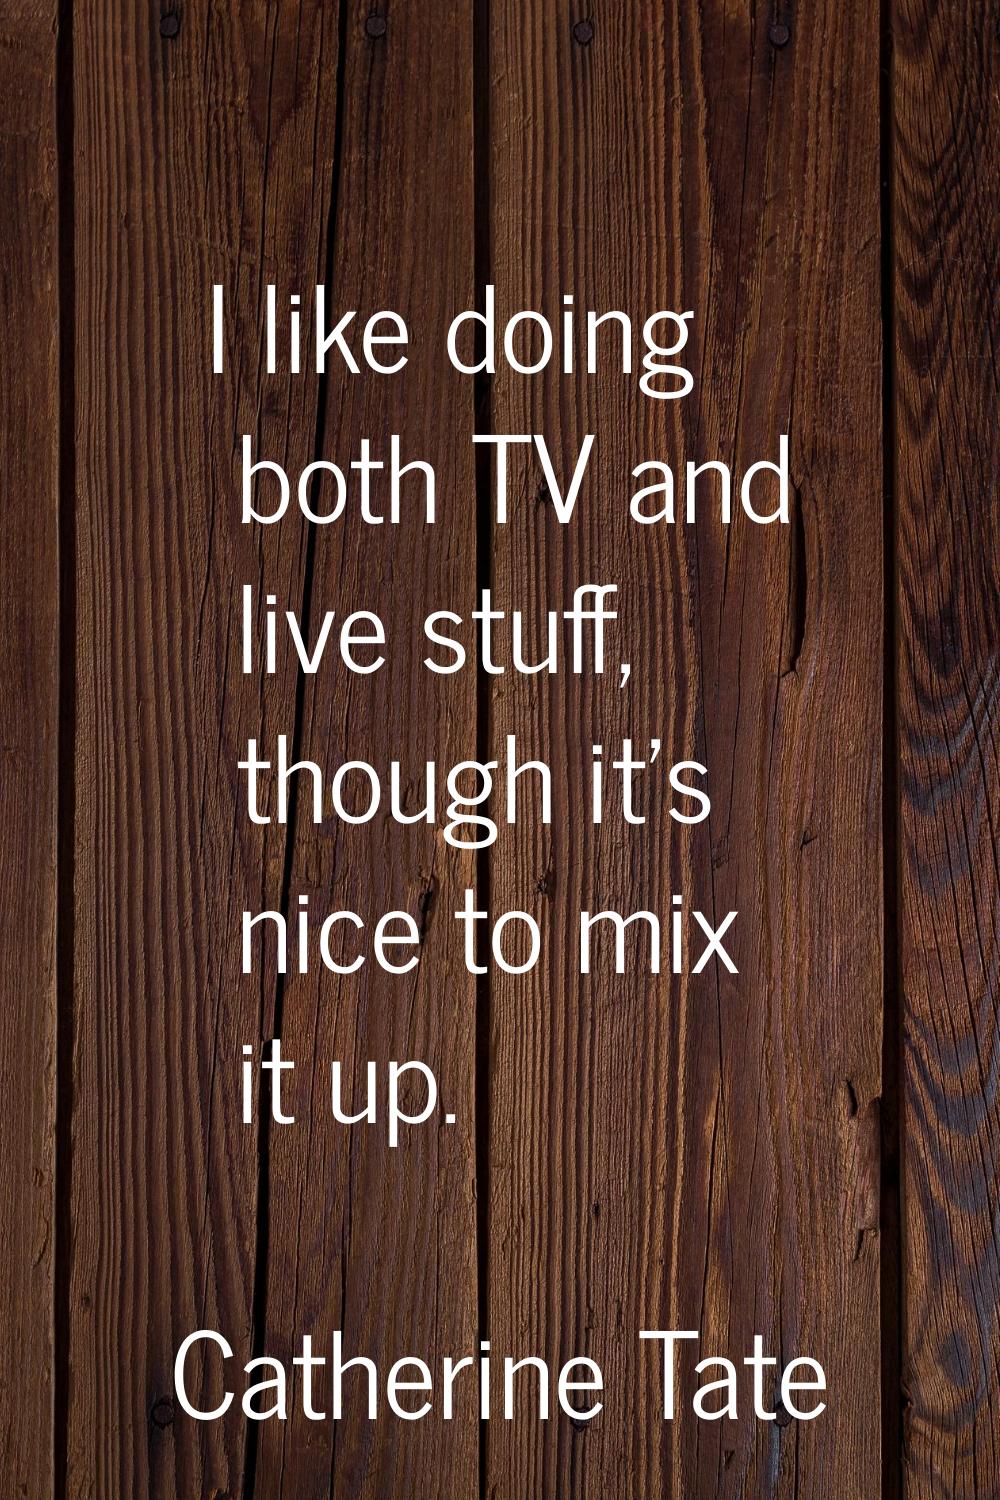 I like doing both TV and live stuff, though it's nice to mix it up.